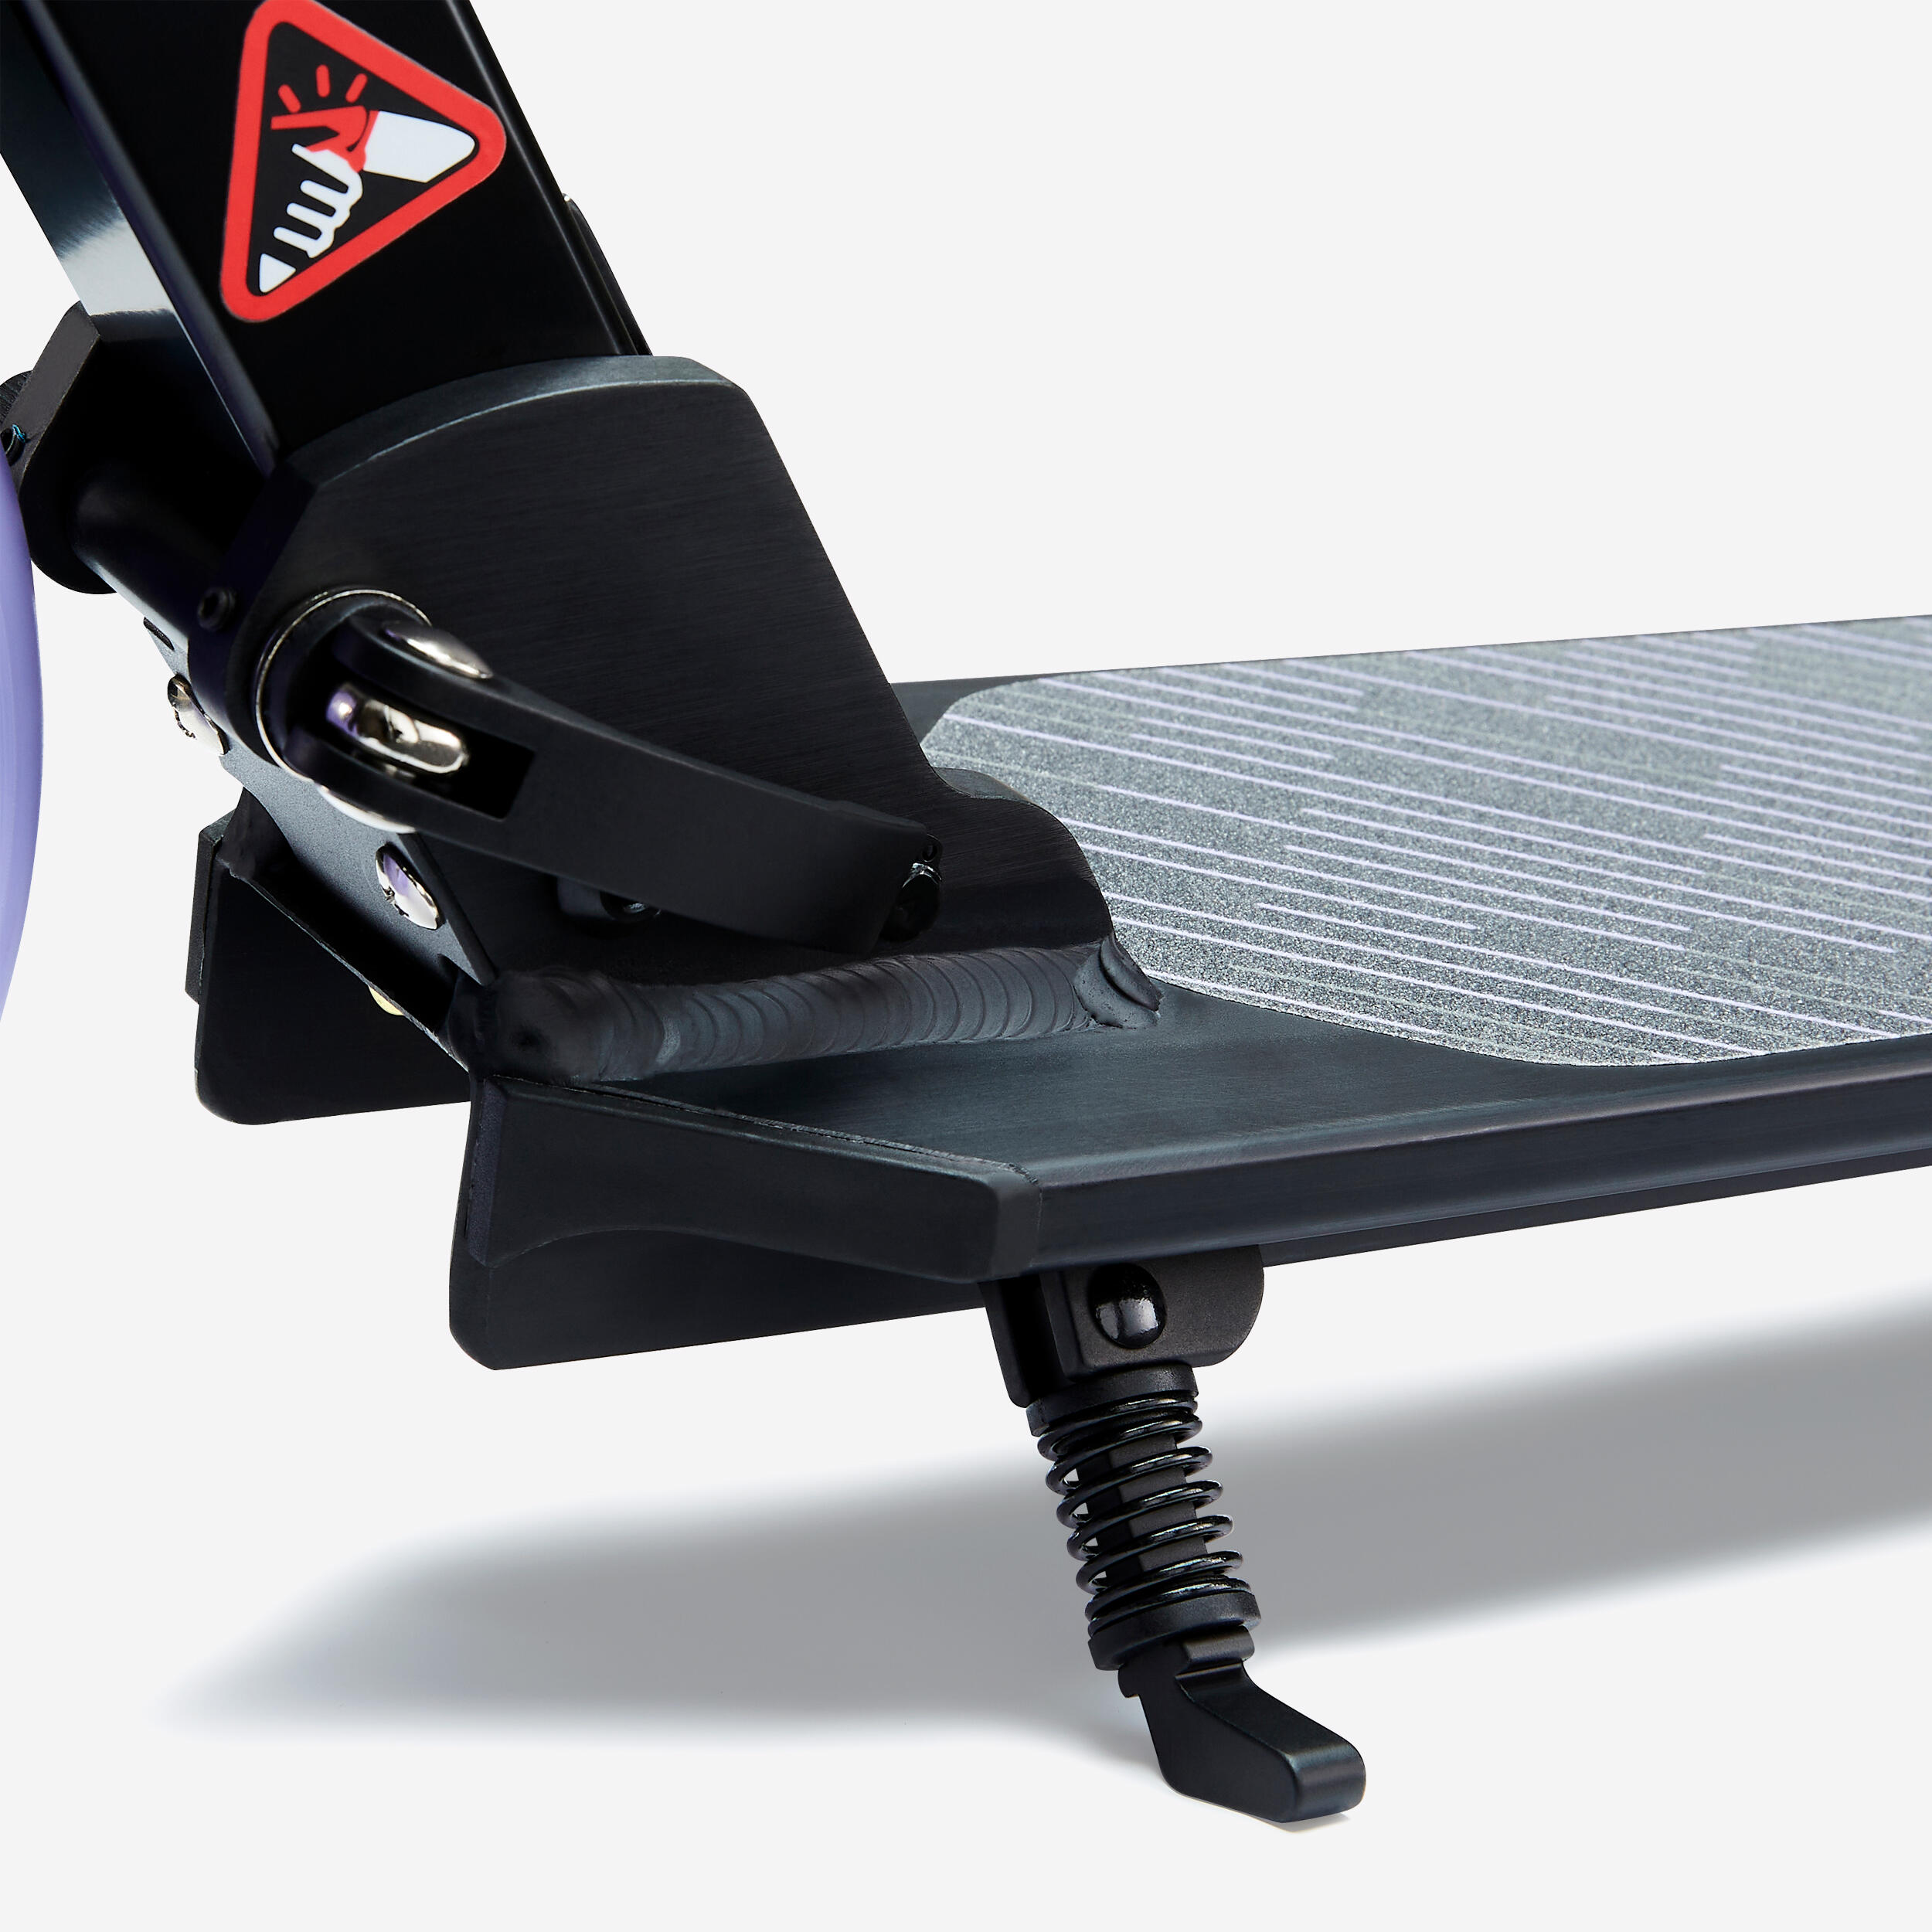 Scooter with Kickstand MID 7 - Black/Lavender 7/9